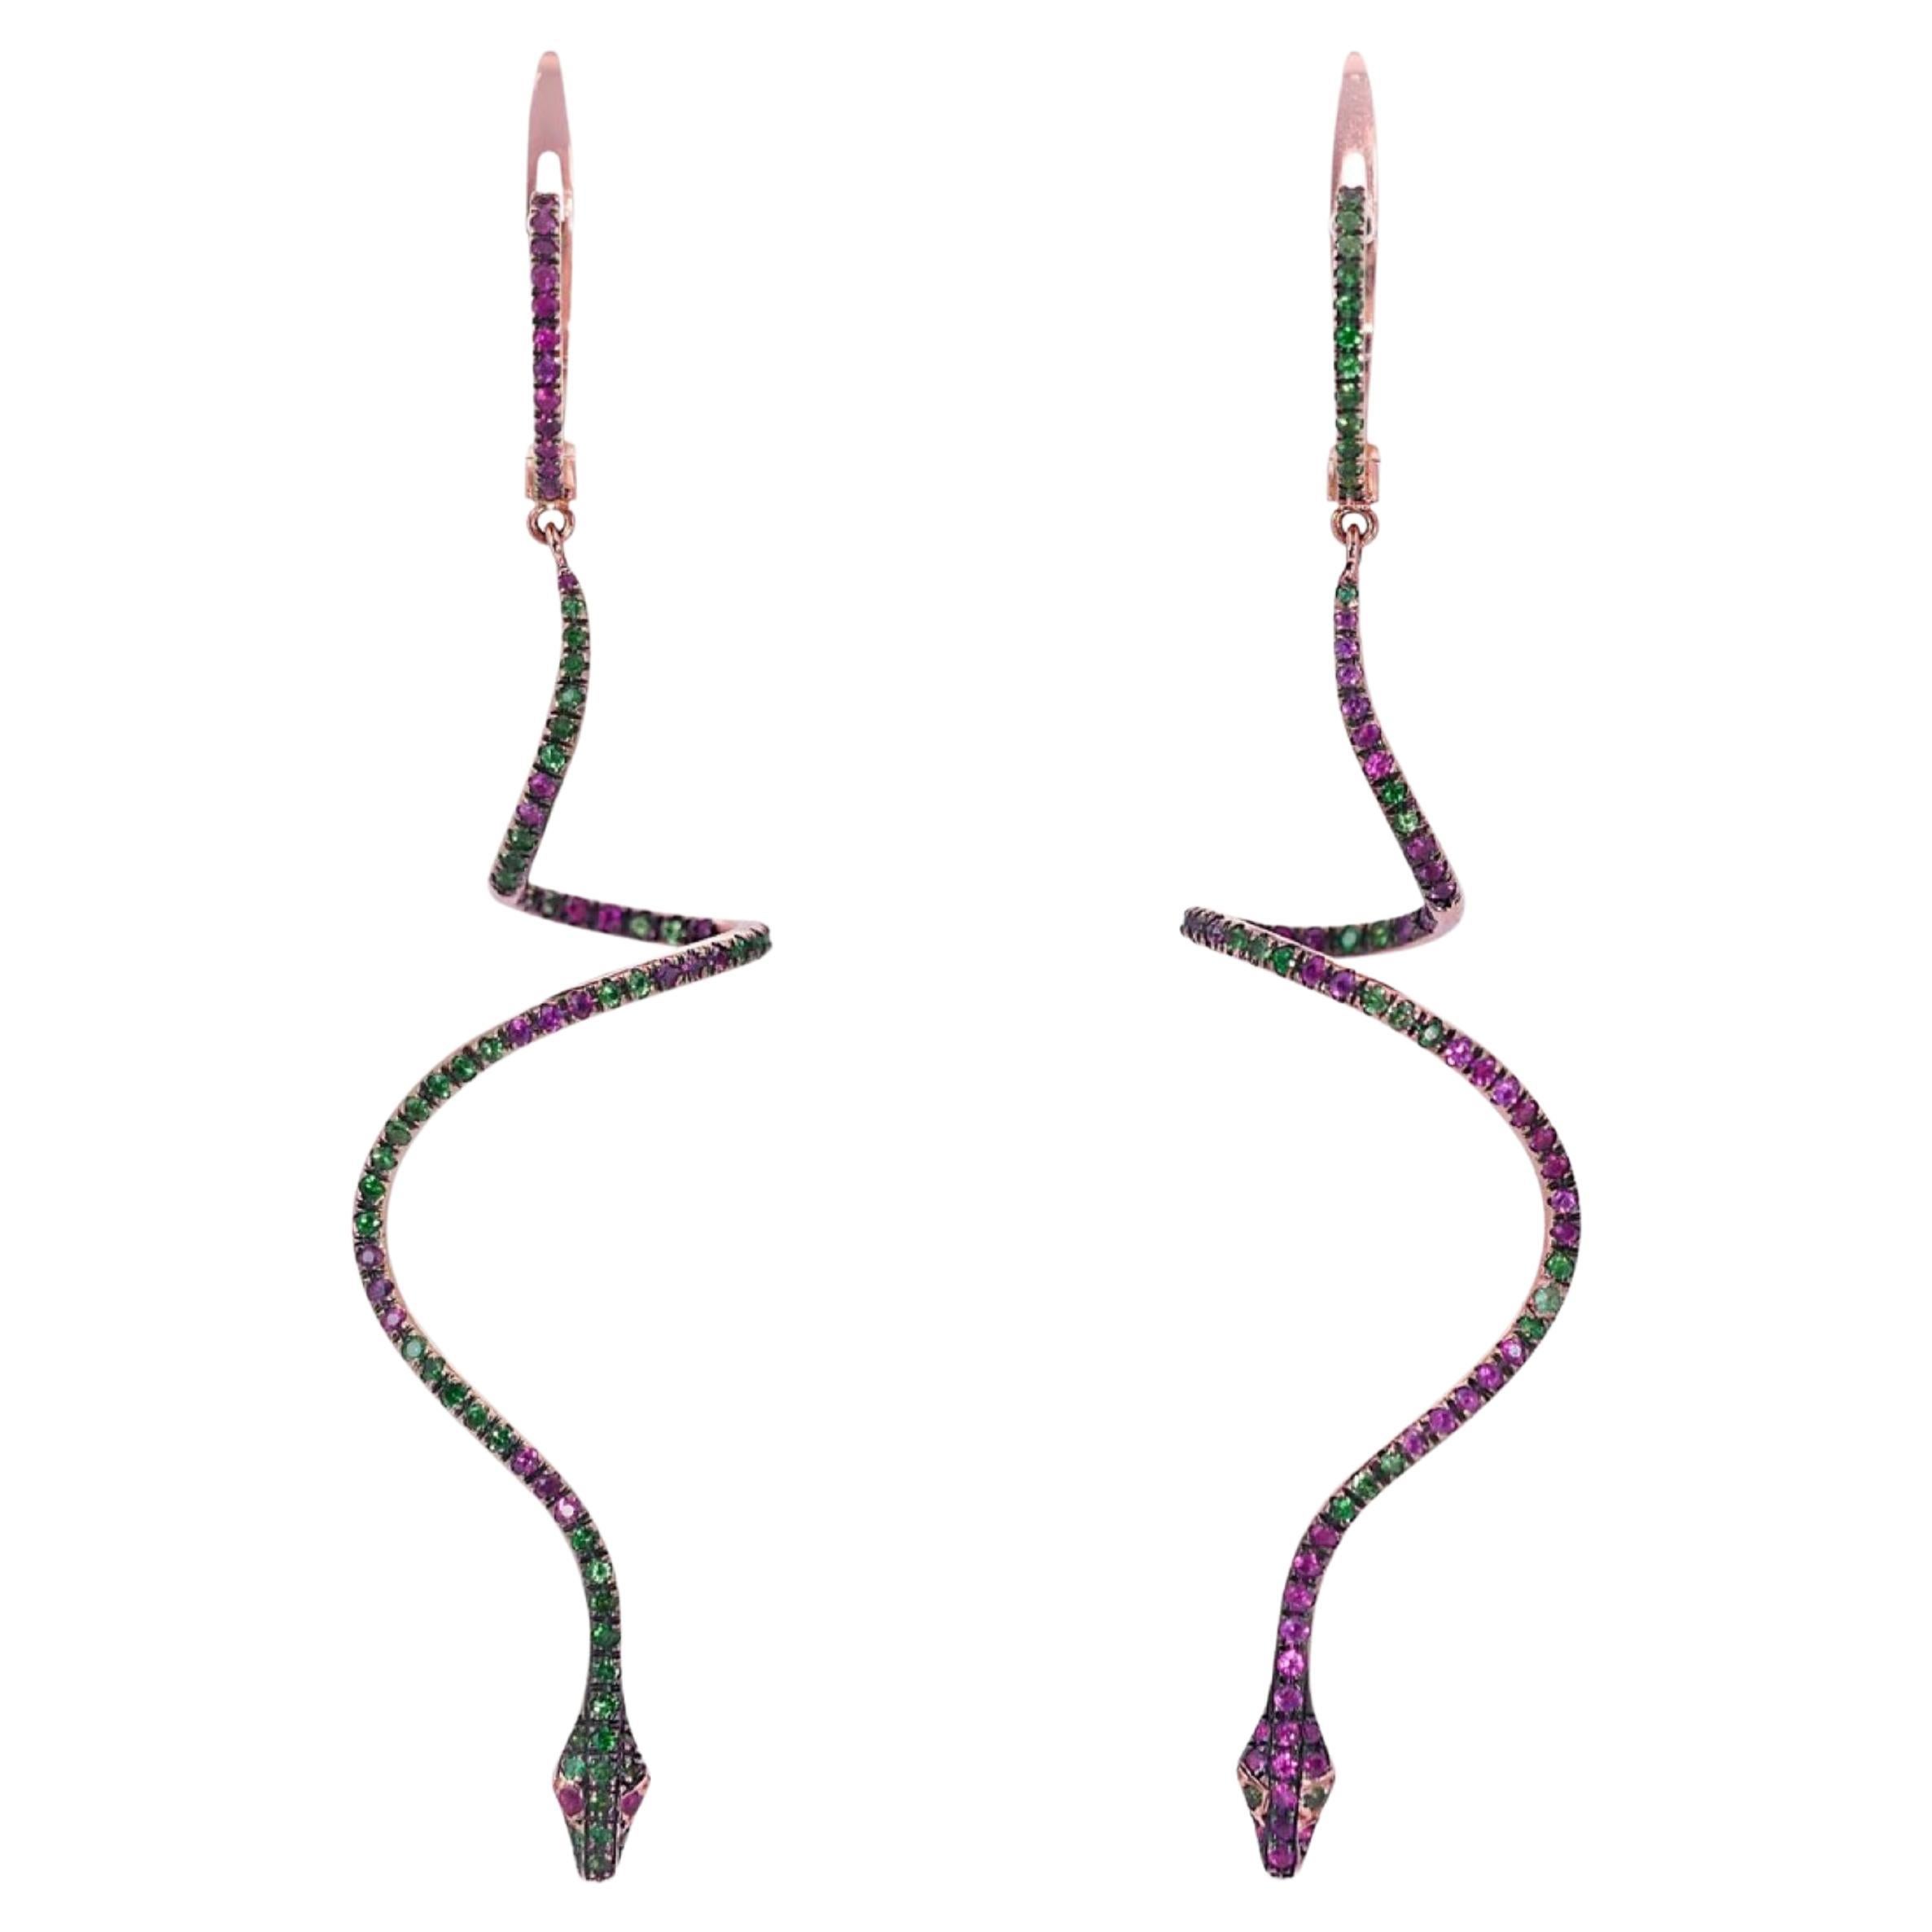 Glamorous 18k Pink Gold Earrings with 2.57 total carat of Natural Emerald and Ru